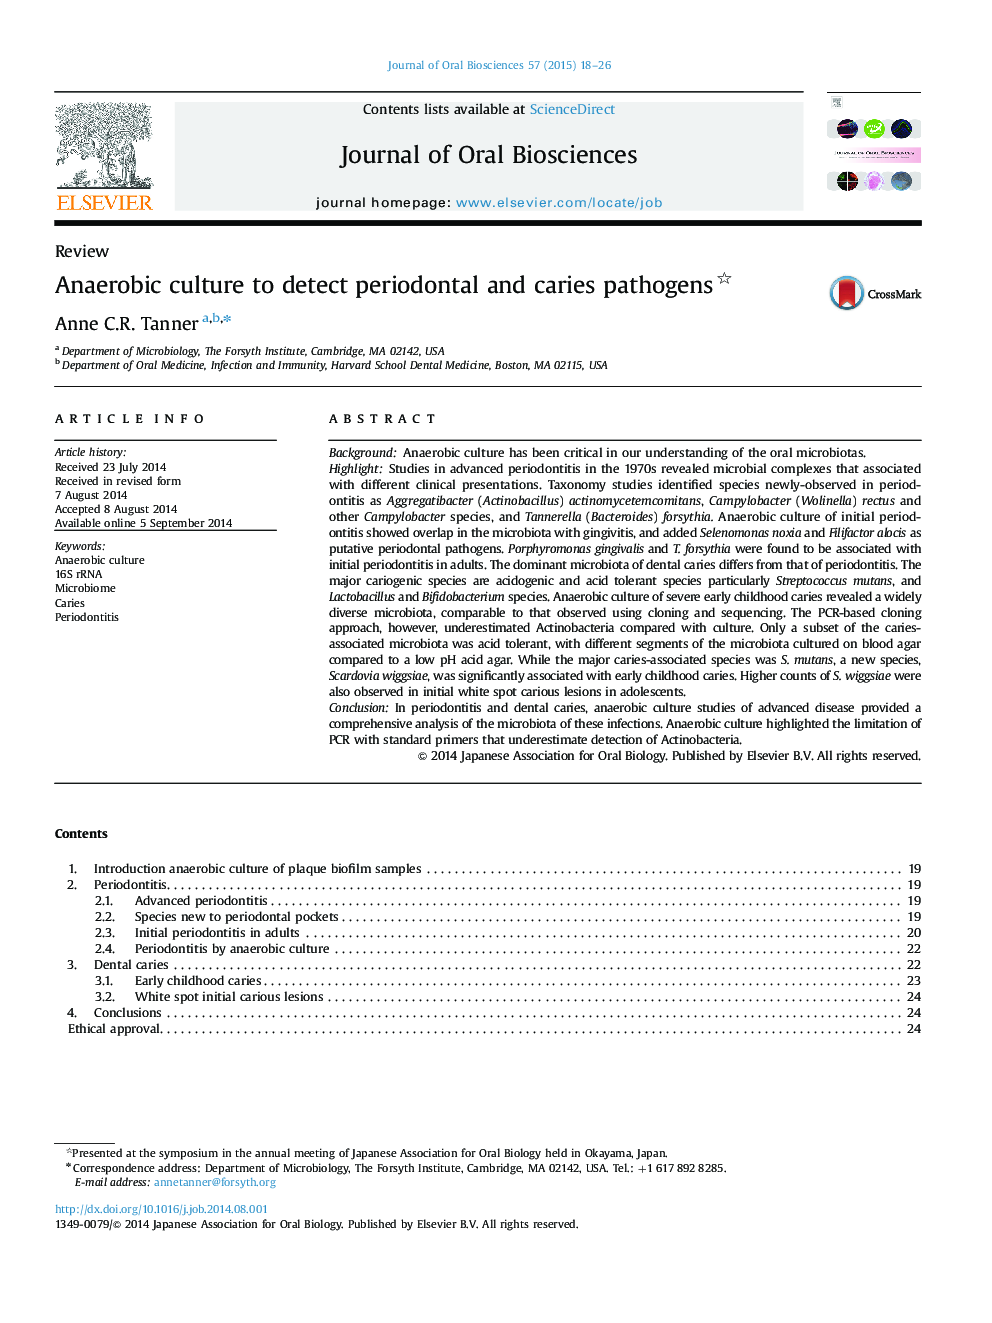 Anaerobic culture to detect periodontal and caries pathogens